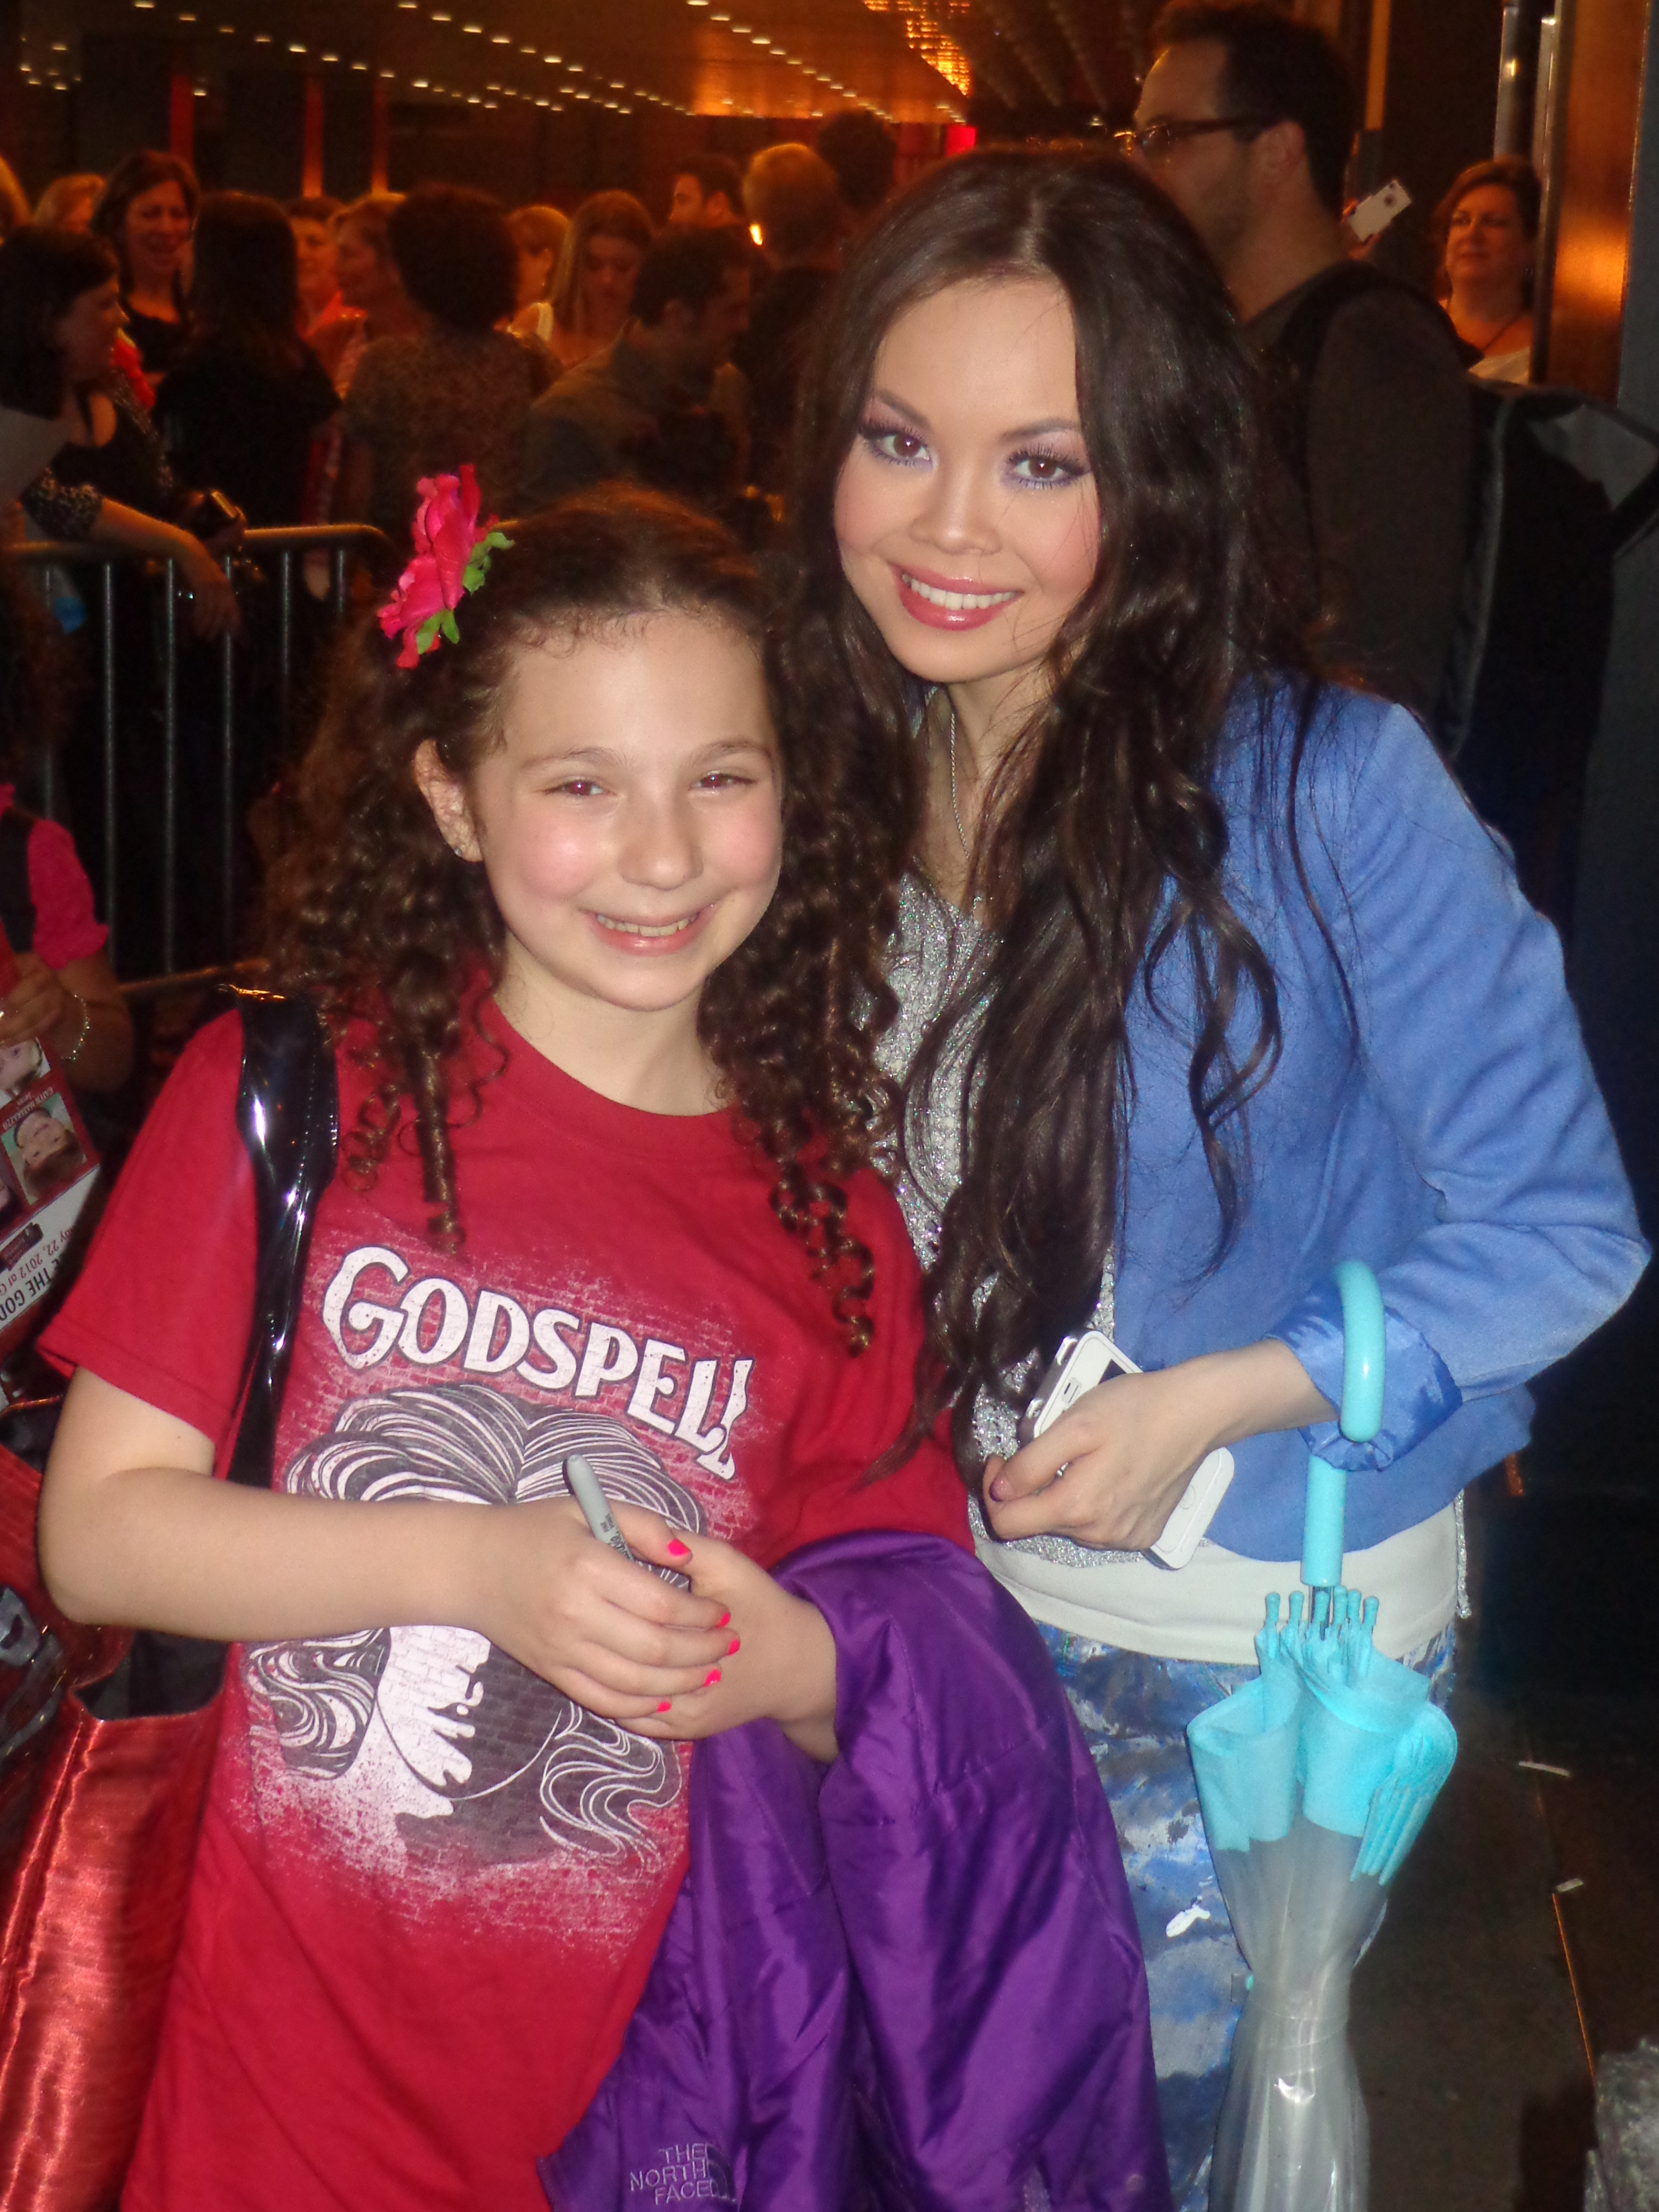 Rebecca with Anna Maria Perez after Godspell 2032 performance